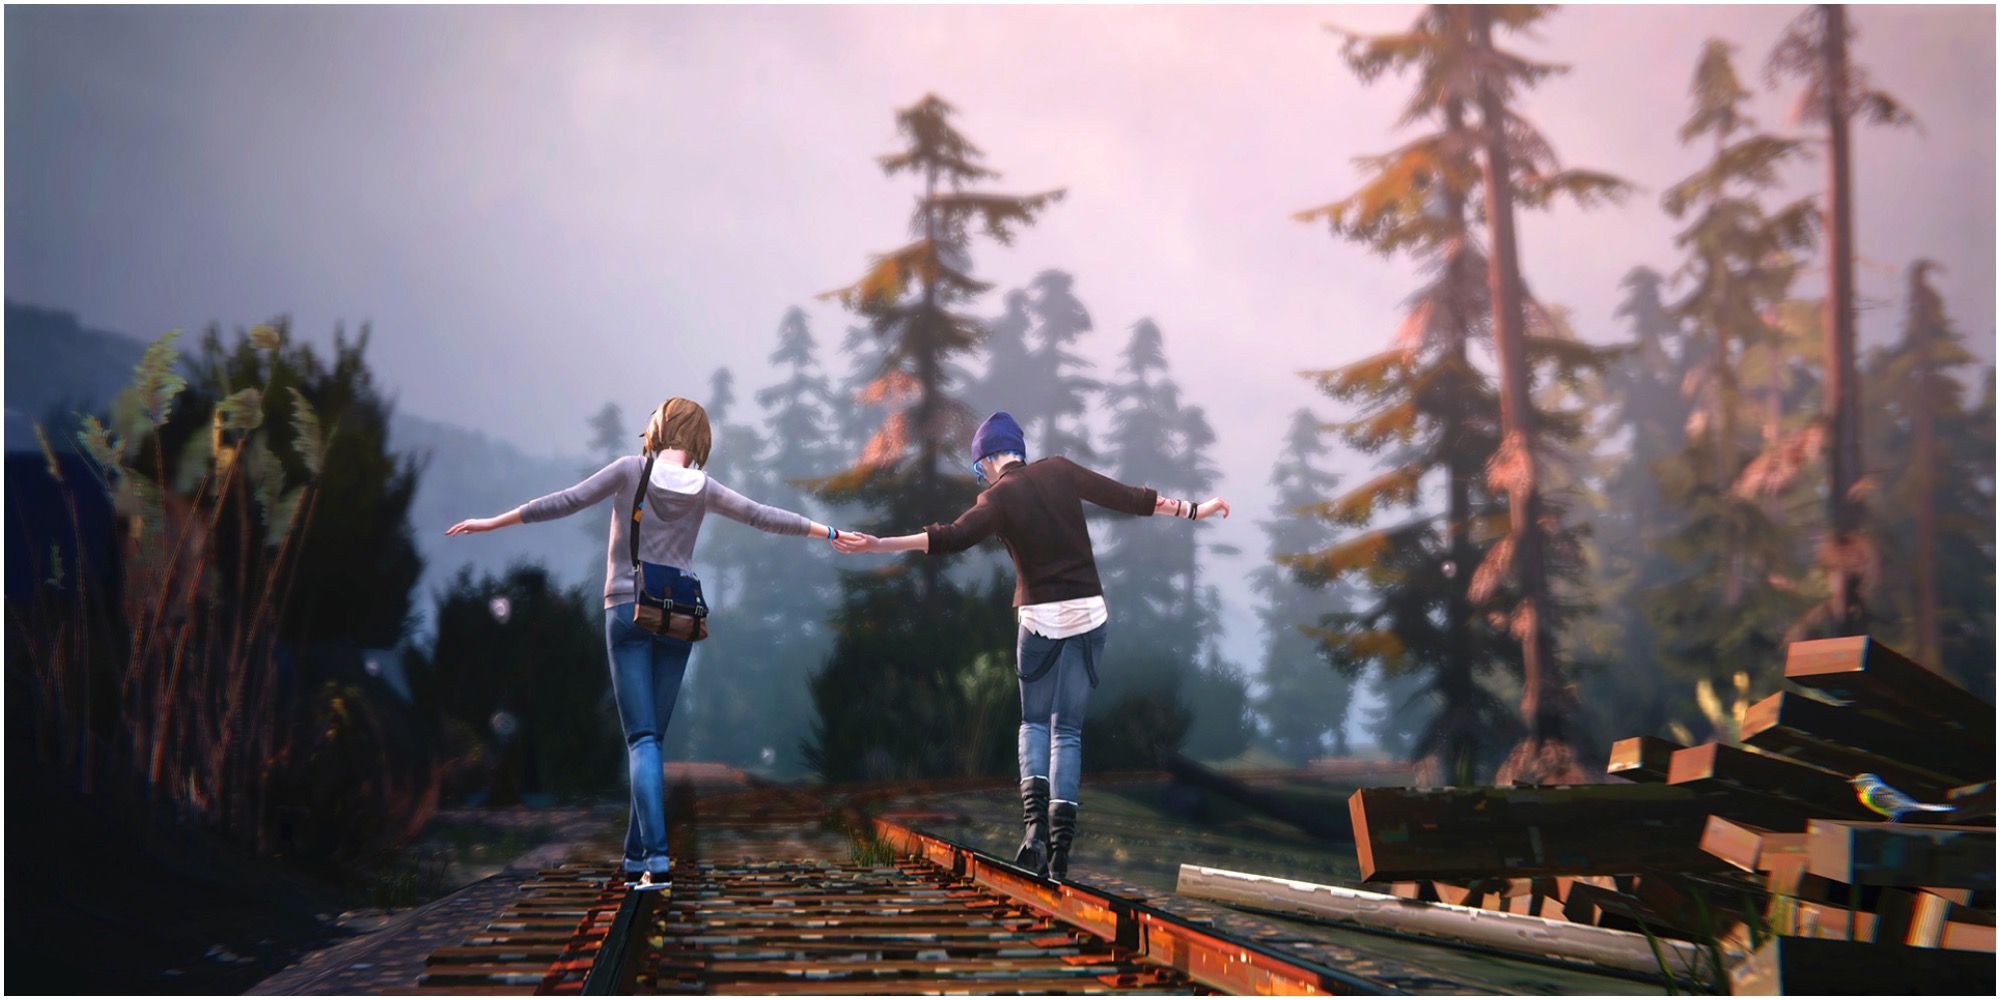 Life Is Strange Chloe And Max Holding Hands On A Train Track